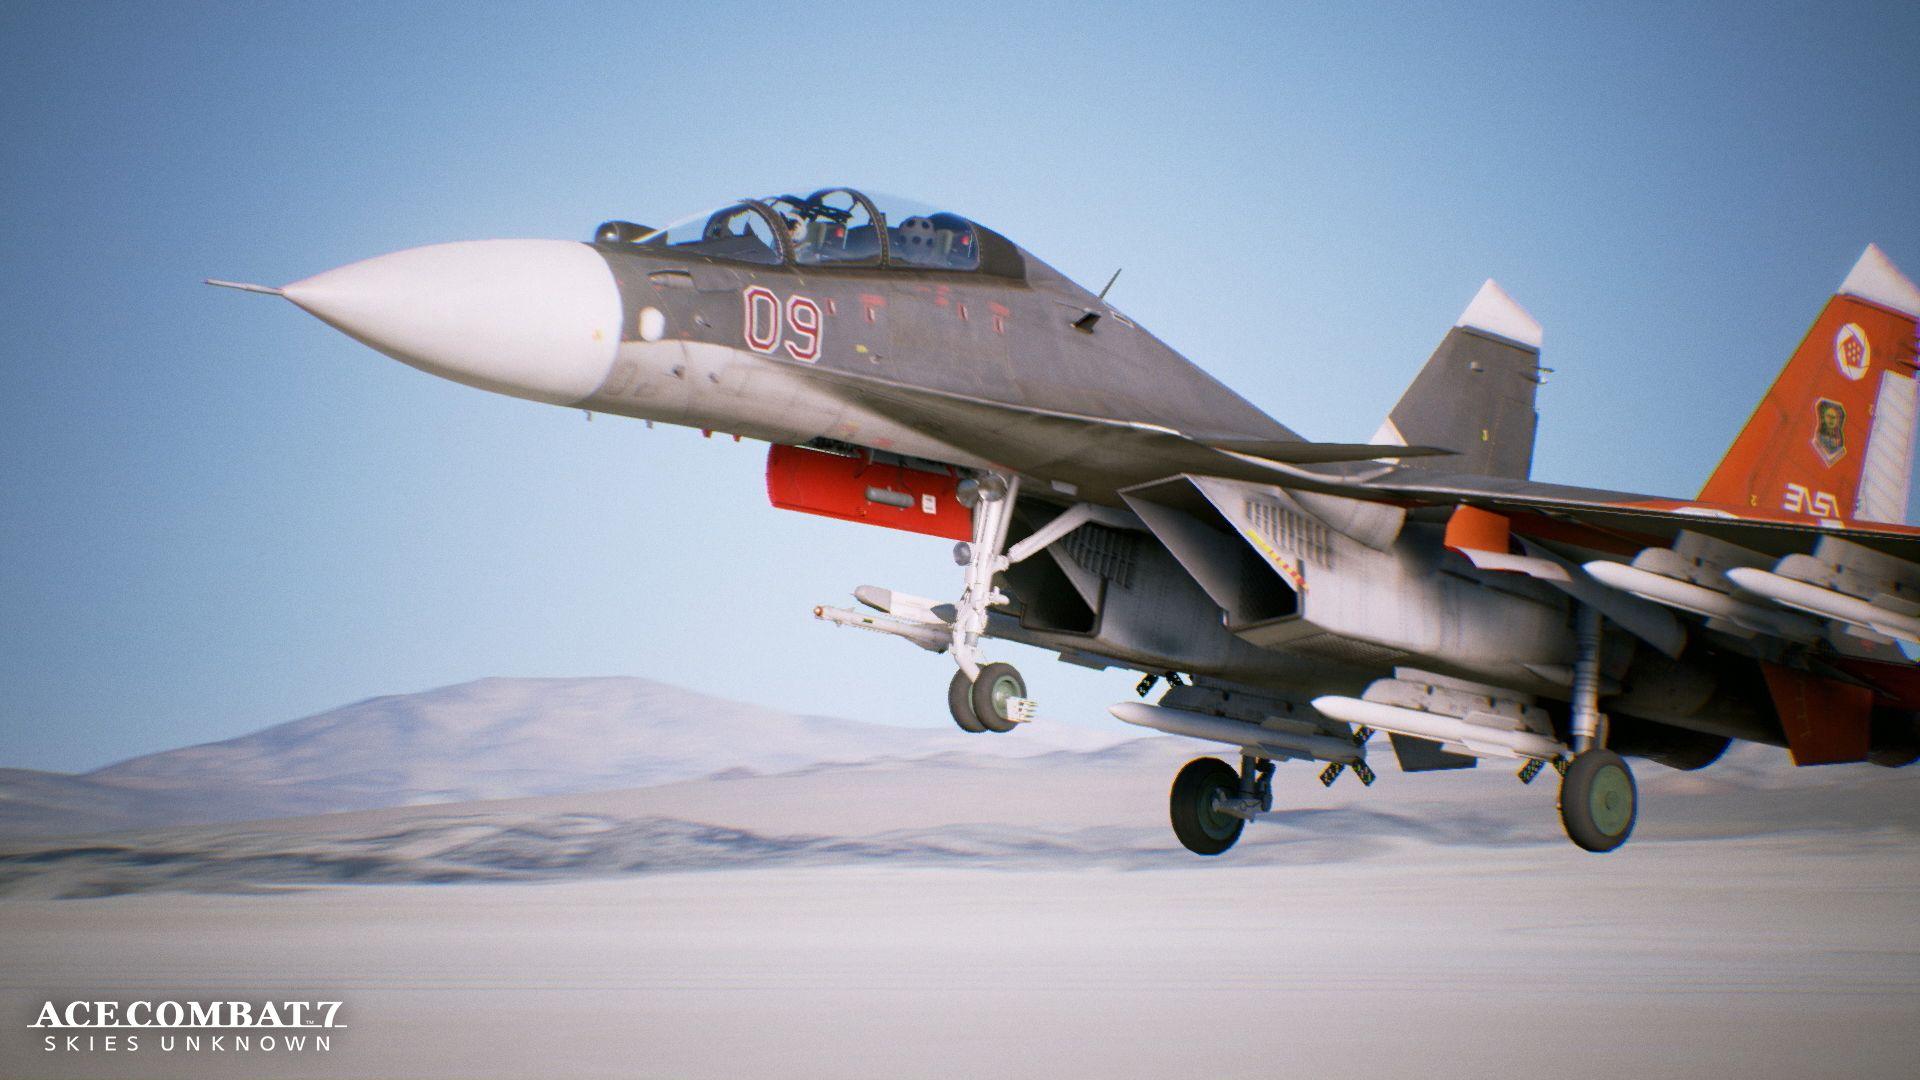 New Ace Combat 7 Finally Reveals the Story; it's Full